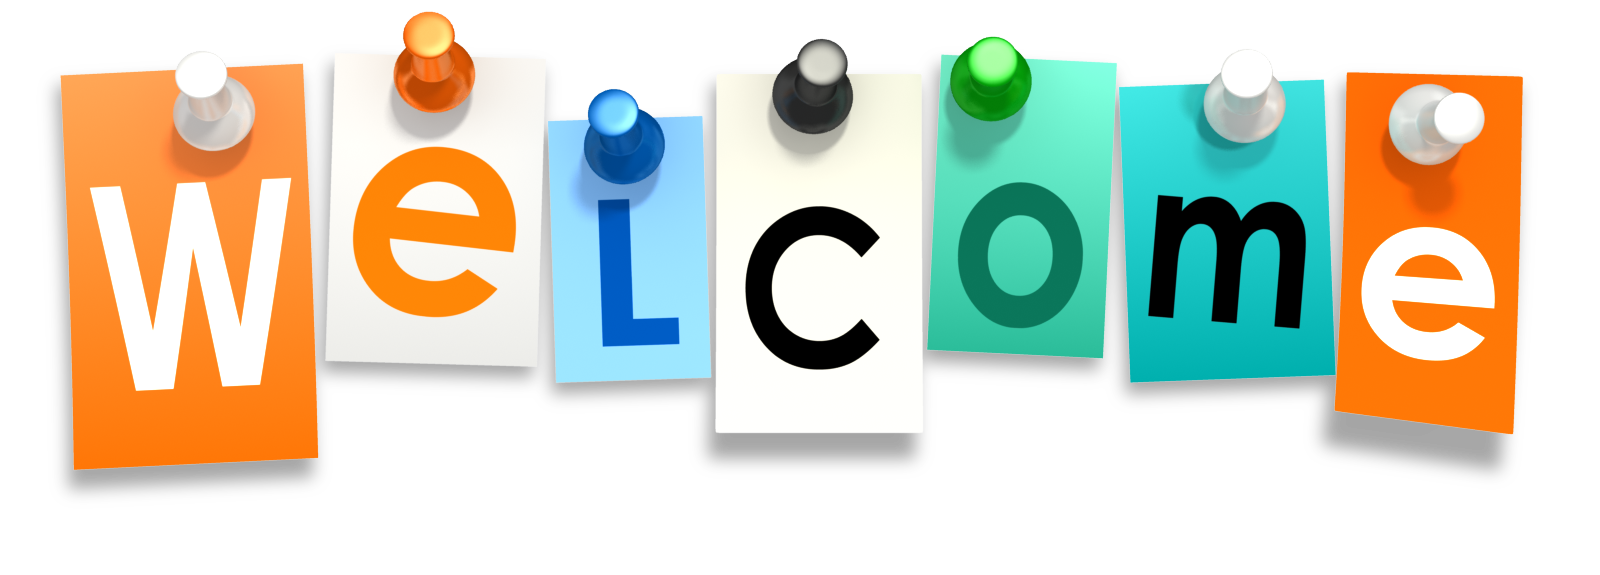 Welcome Image - Welcome, Transparent background PNG HD thumbnail